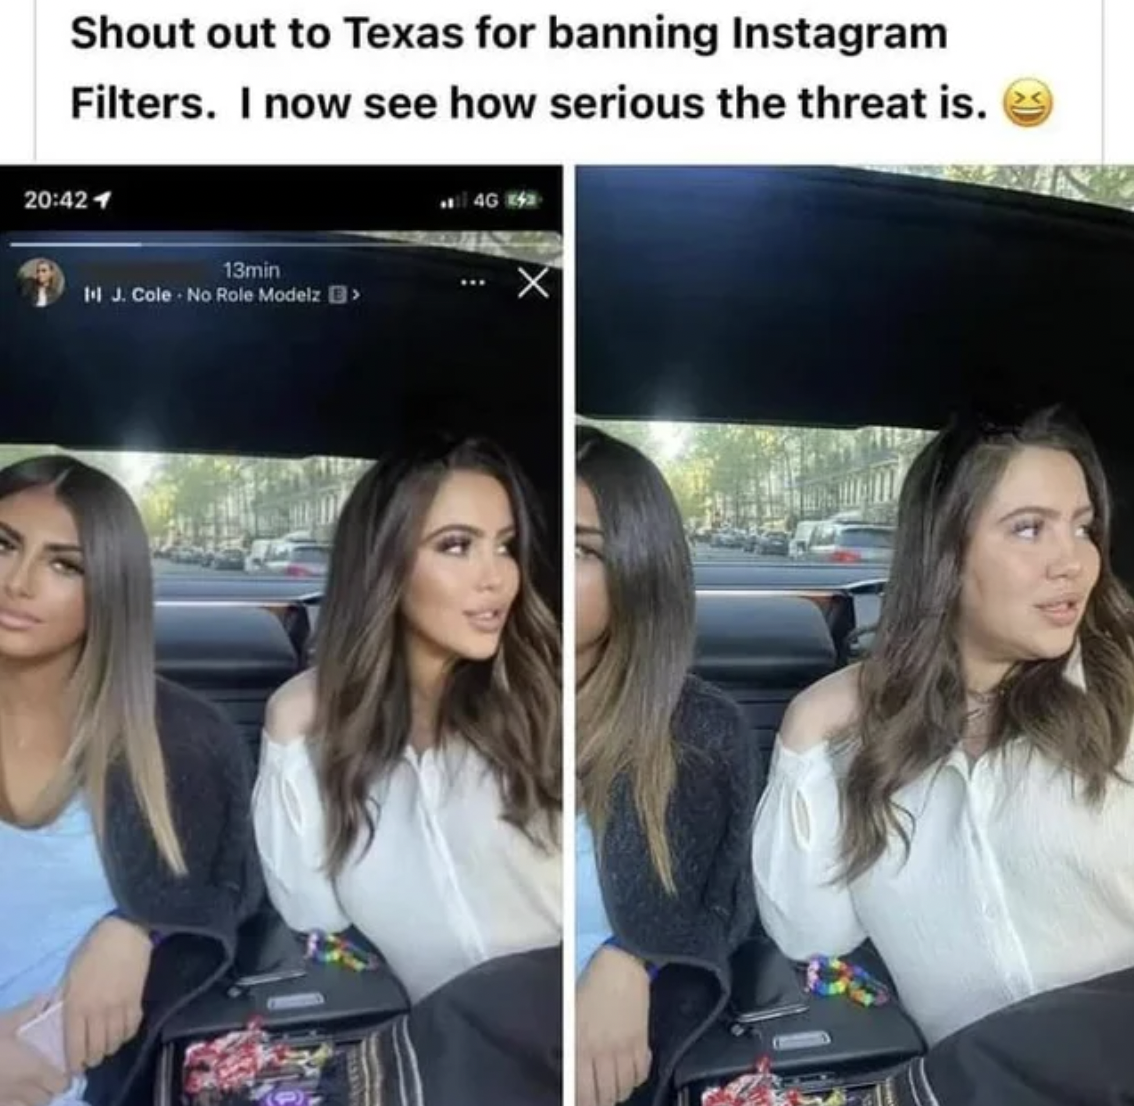 Friday Facepalms and Fails - Shout out to Texas for banning Instagram Filters.